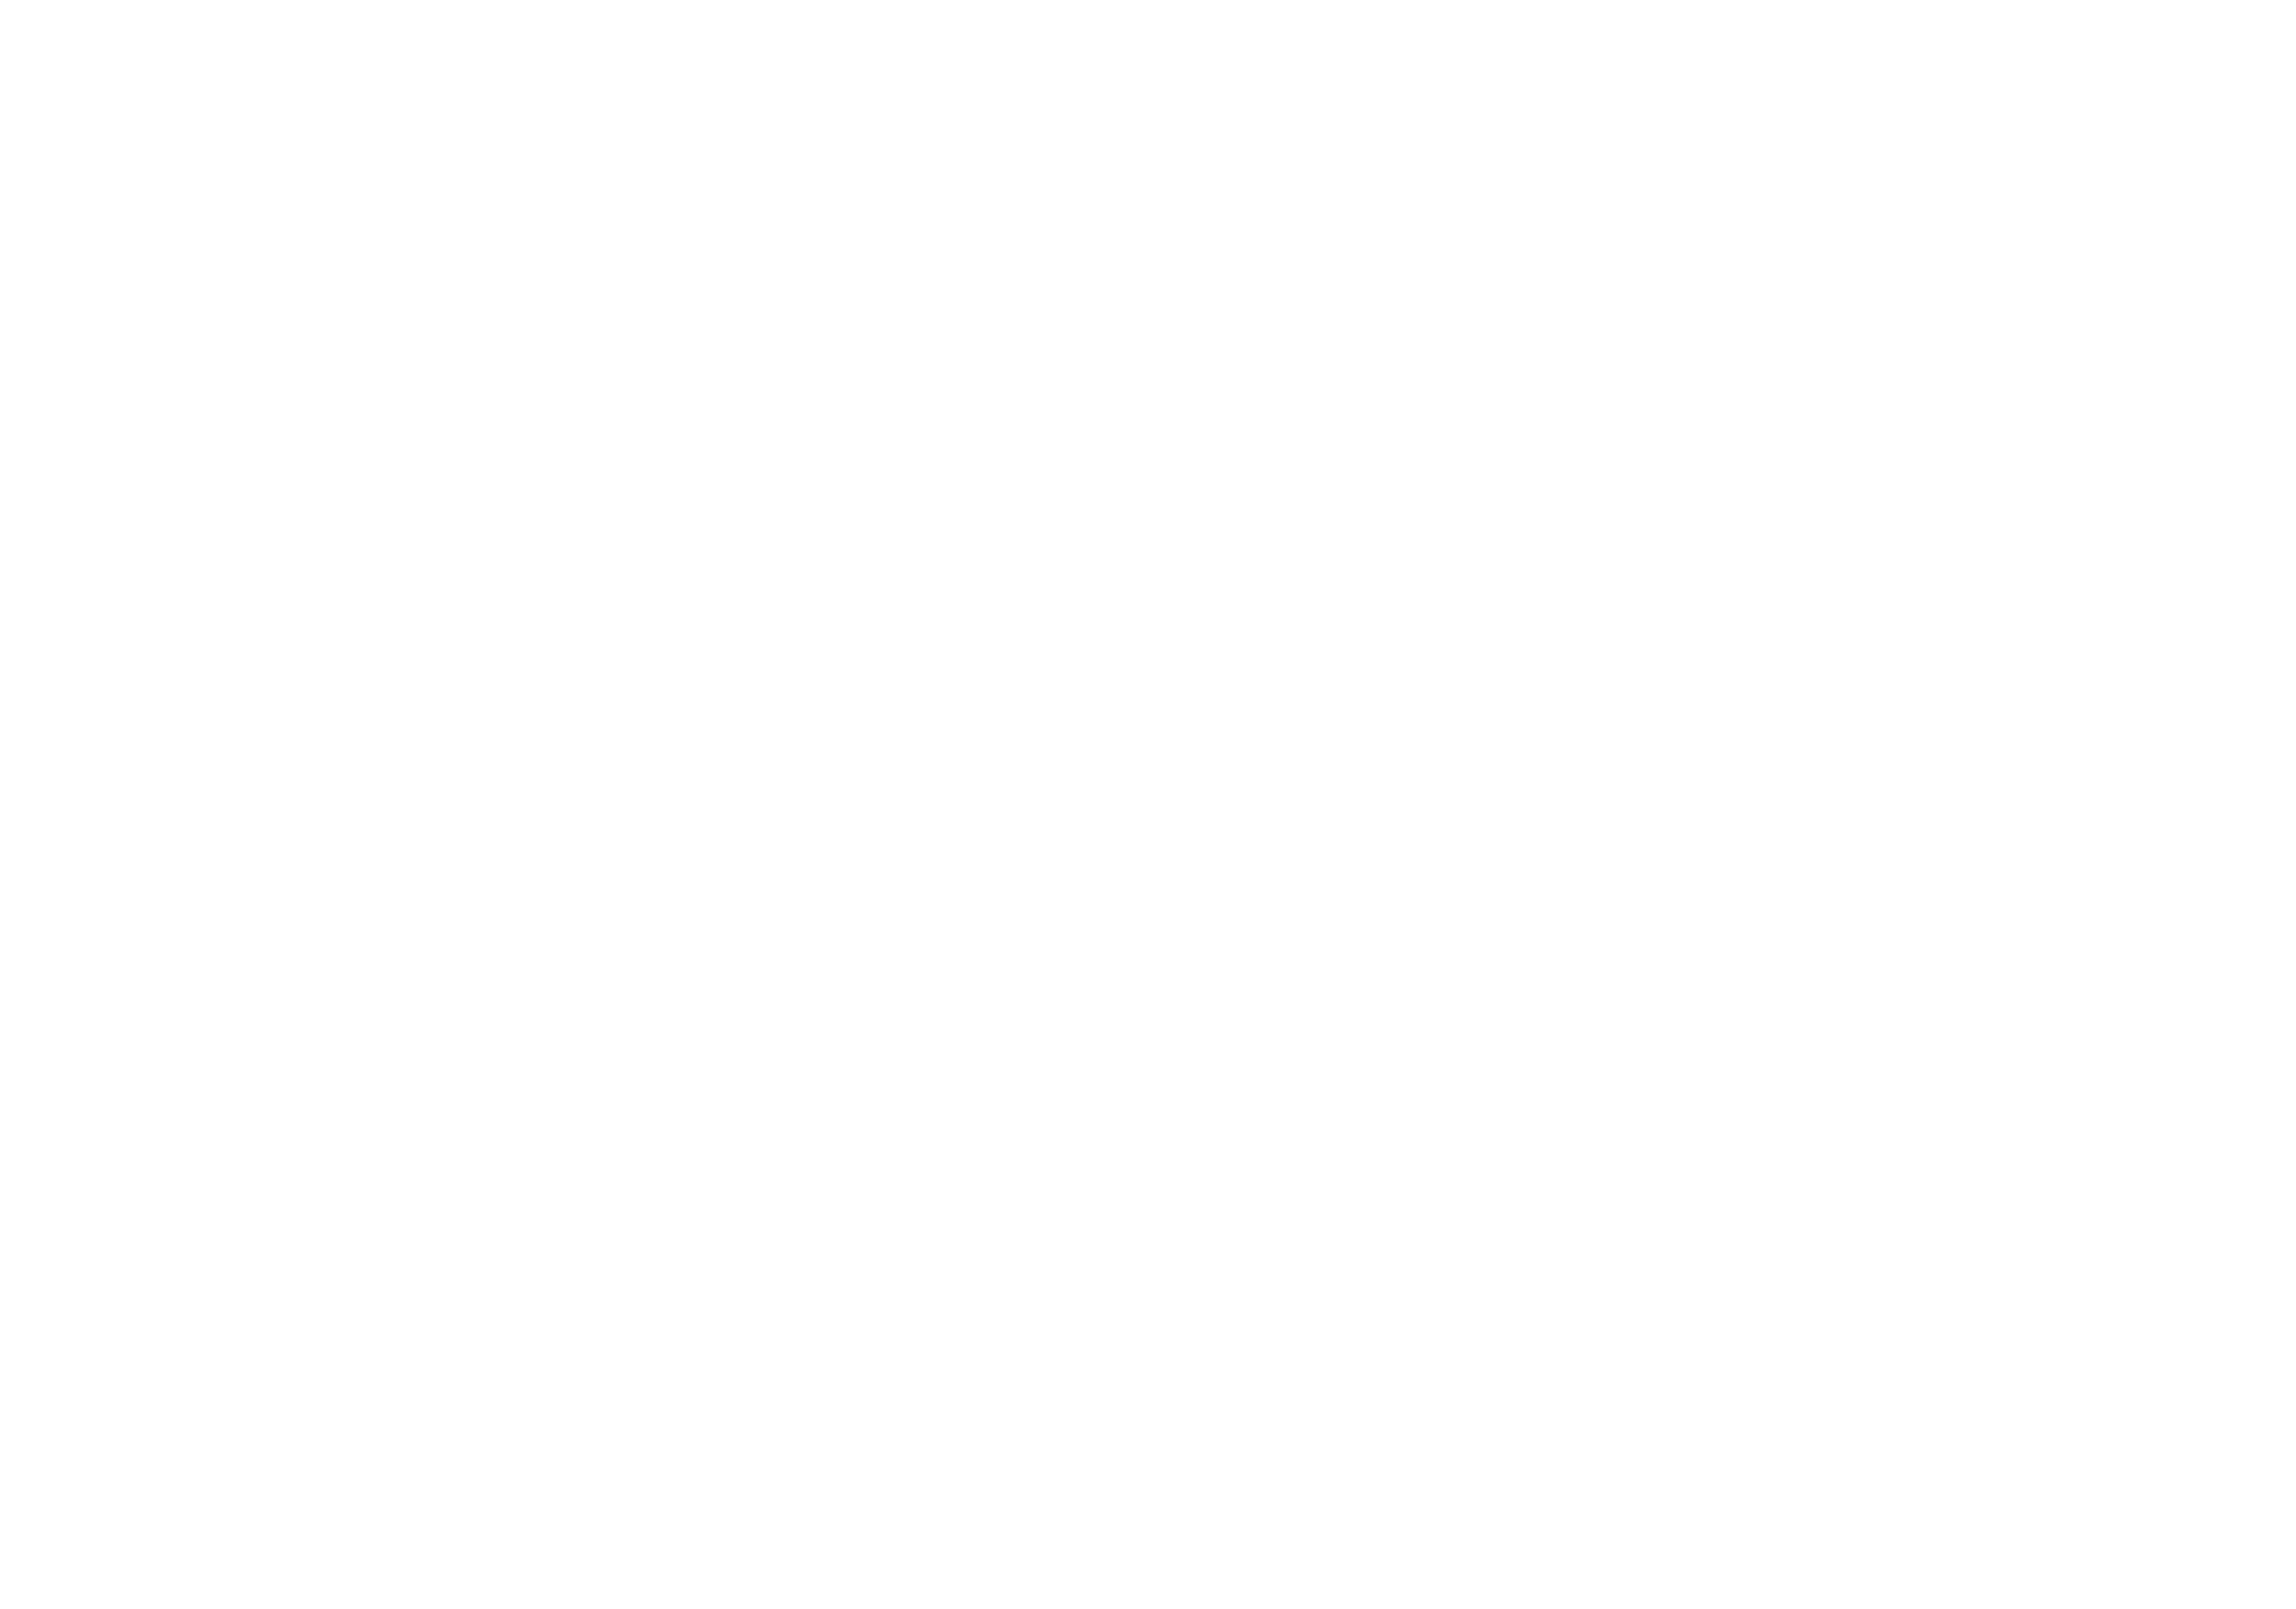 Hung Thinh Coporation